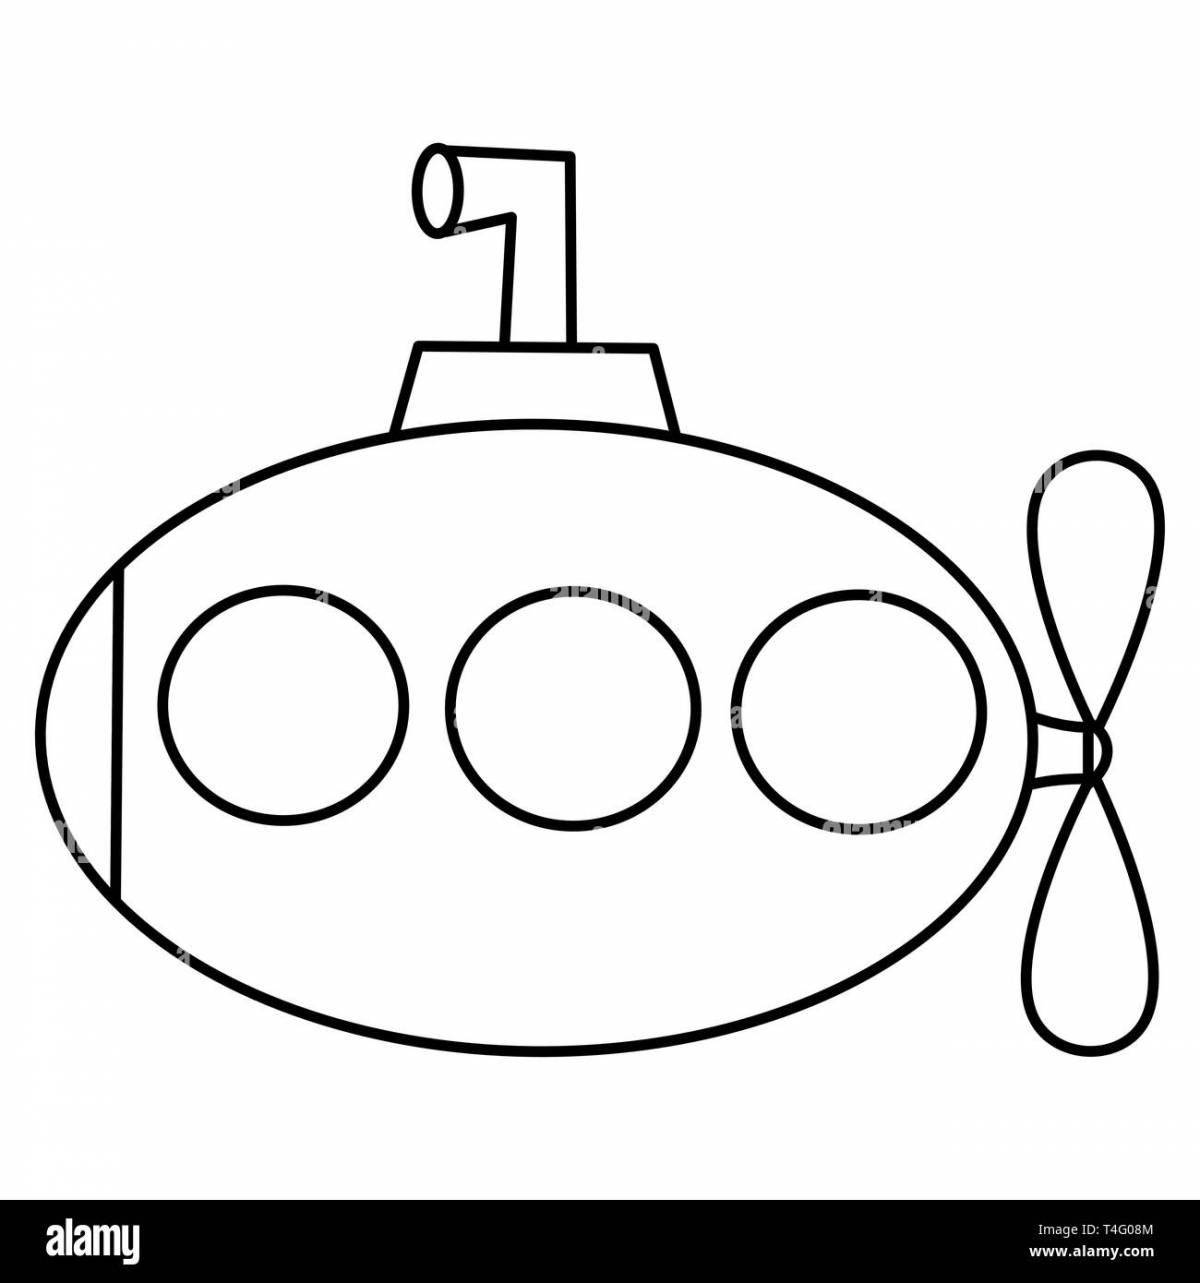 Adorable submarine coloring book for kids 5-6 years old